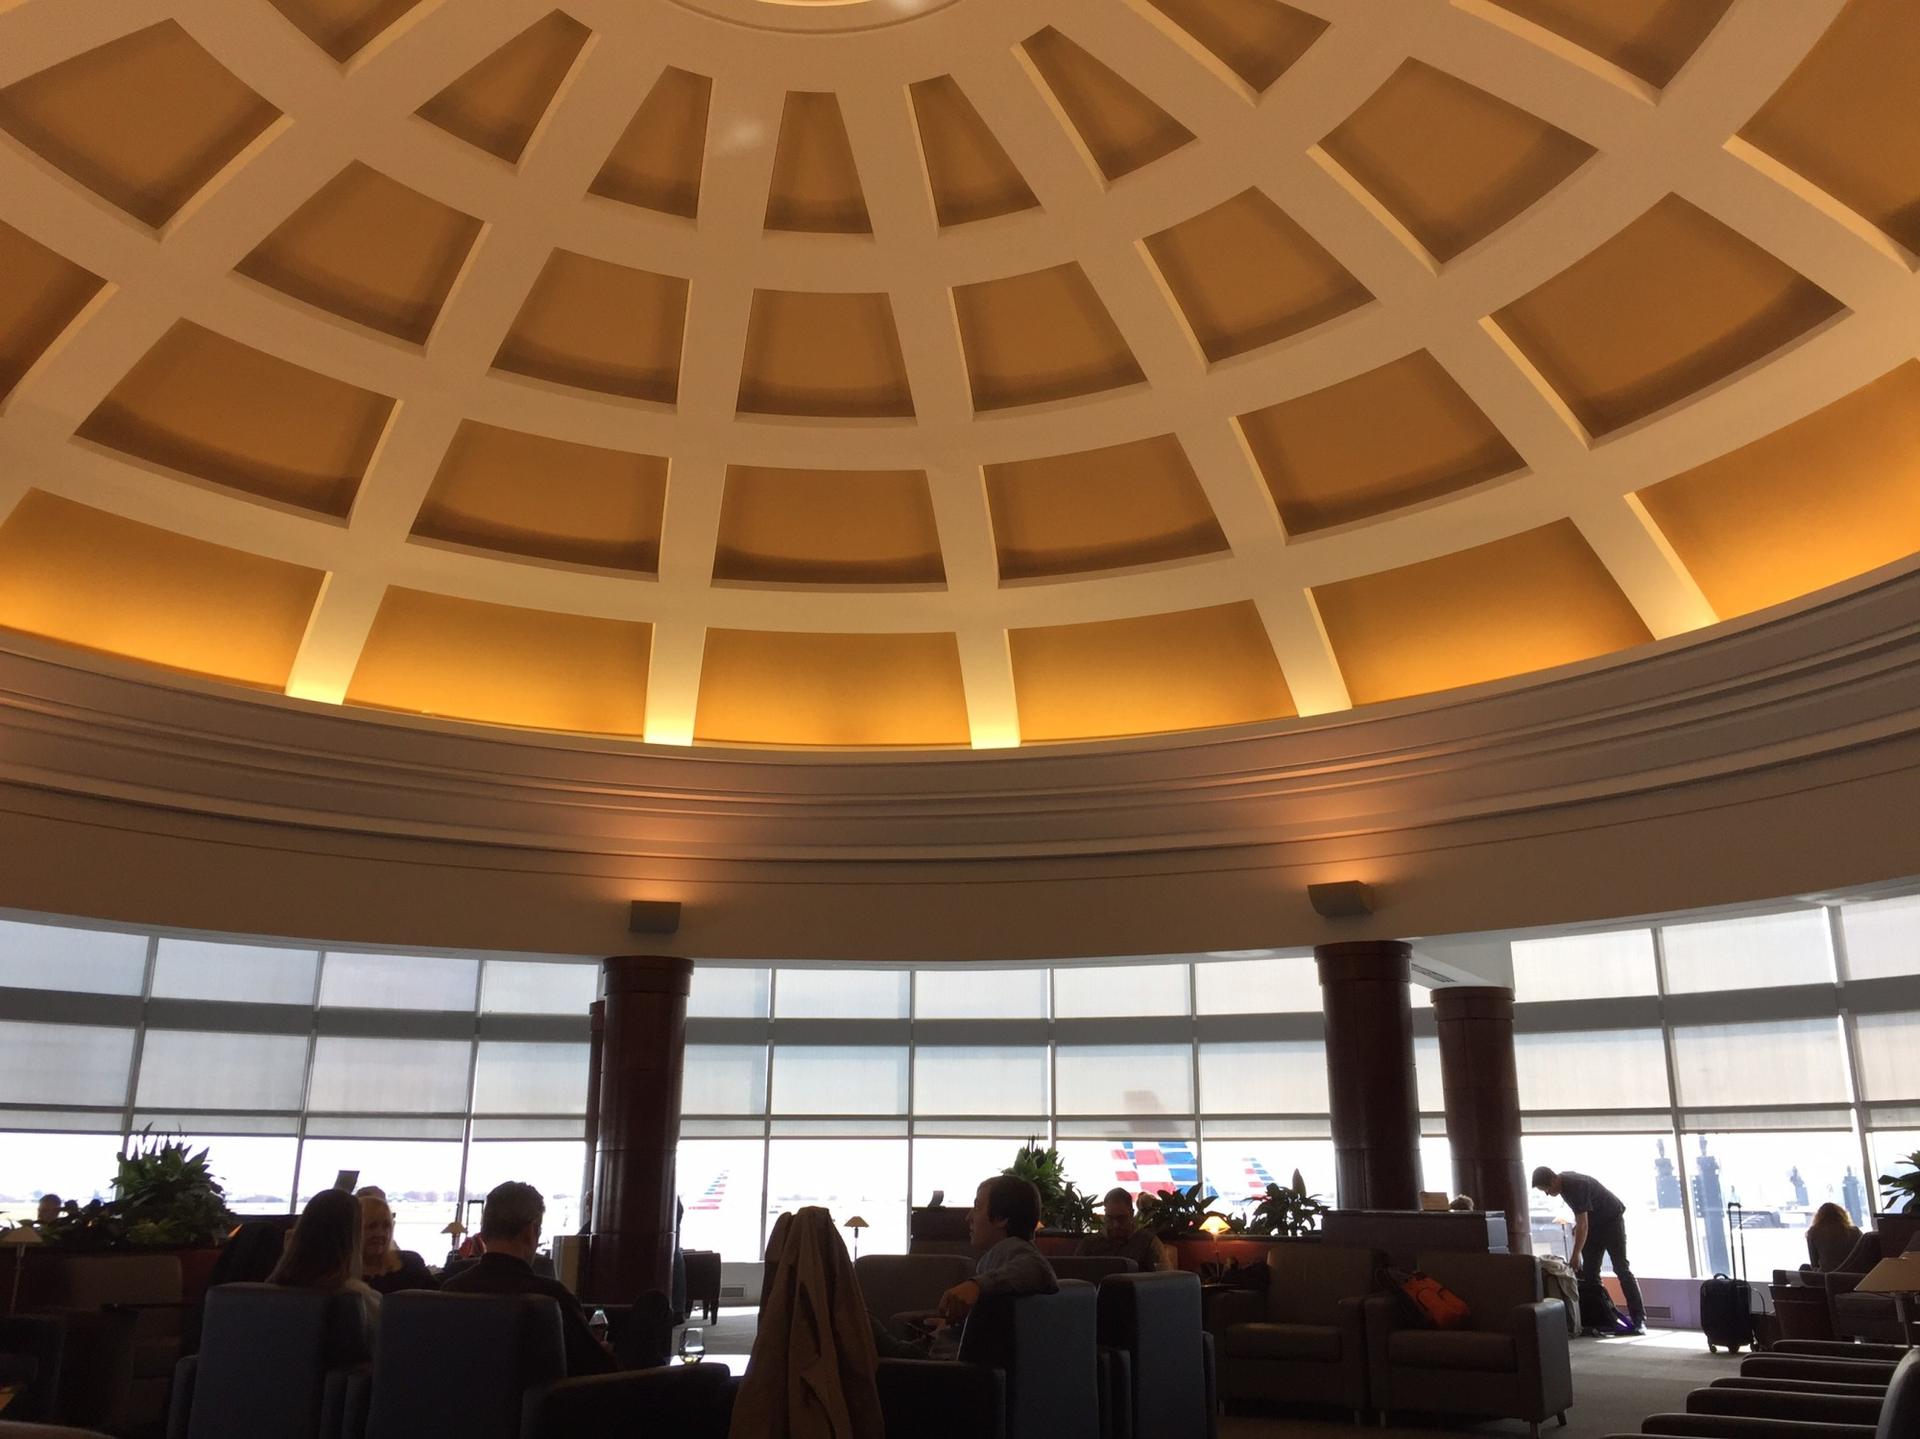 American Airlines Admirals Club image 25 of 37